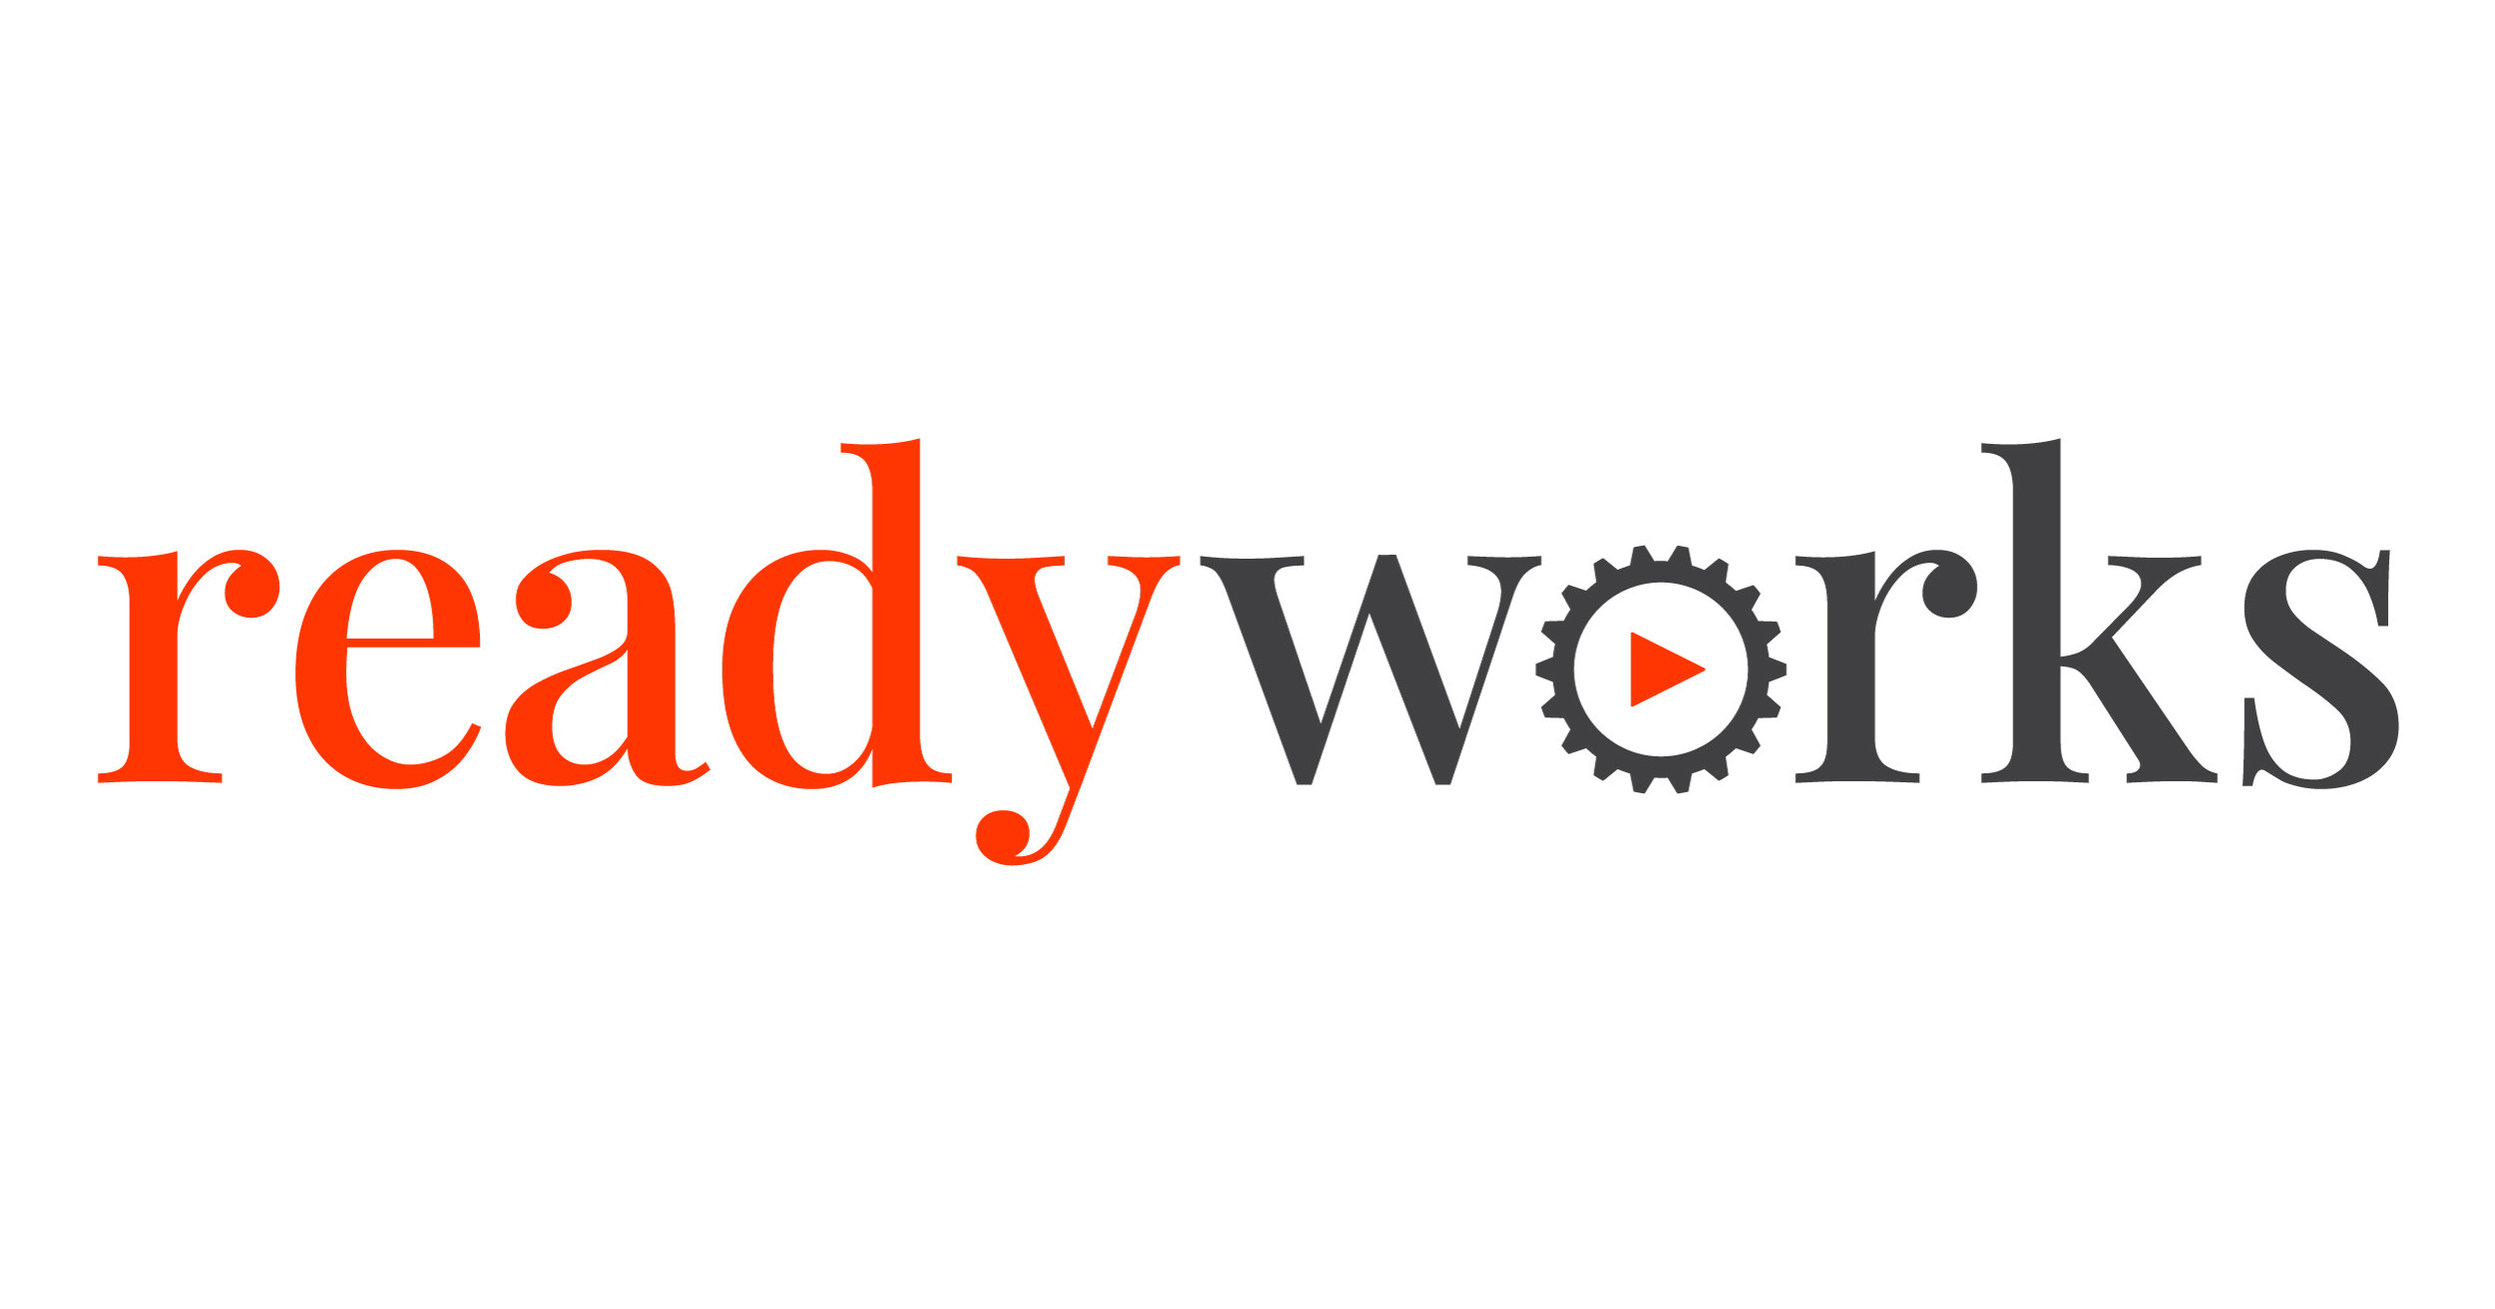 ReadyWorks Partners with Unisys on Digital Workplace and Cloud, Applications and Infrastructure Solutions